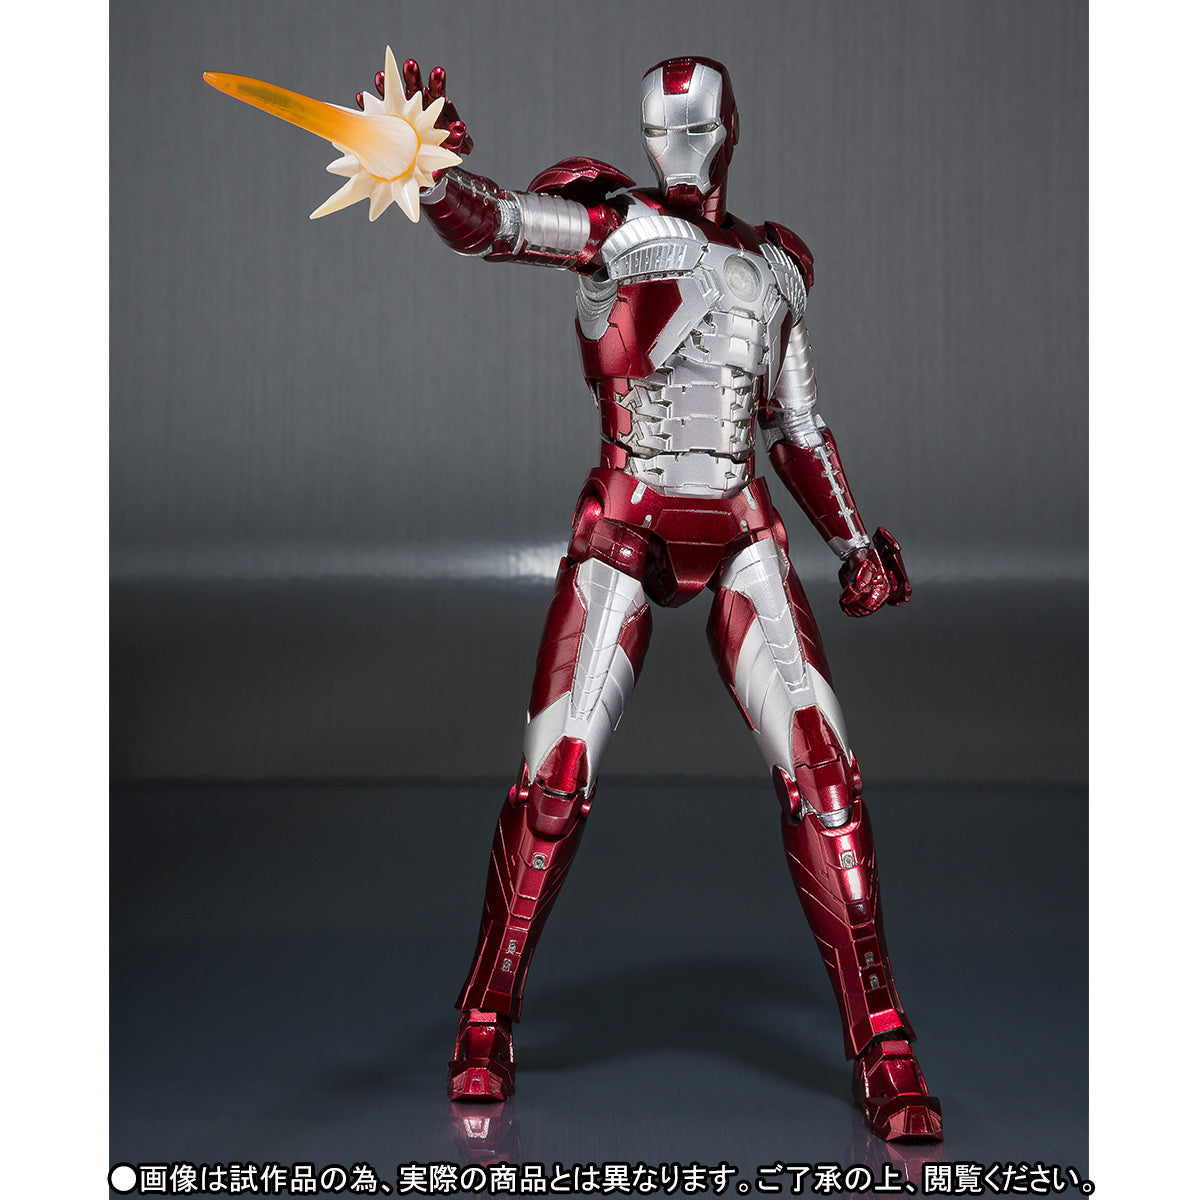 S.H. Figuarts - Iron Man Mark V with 